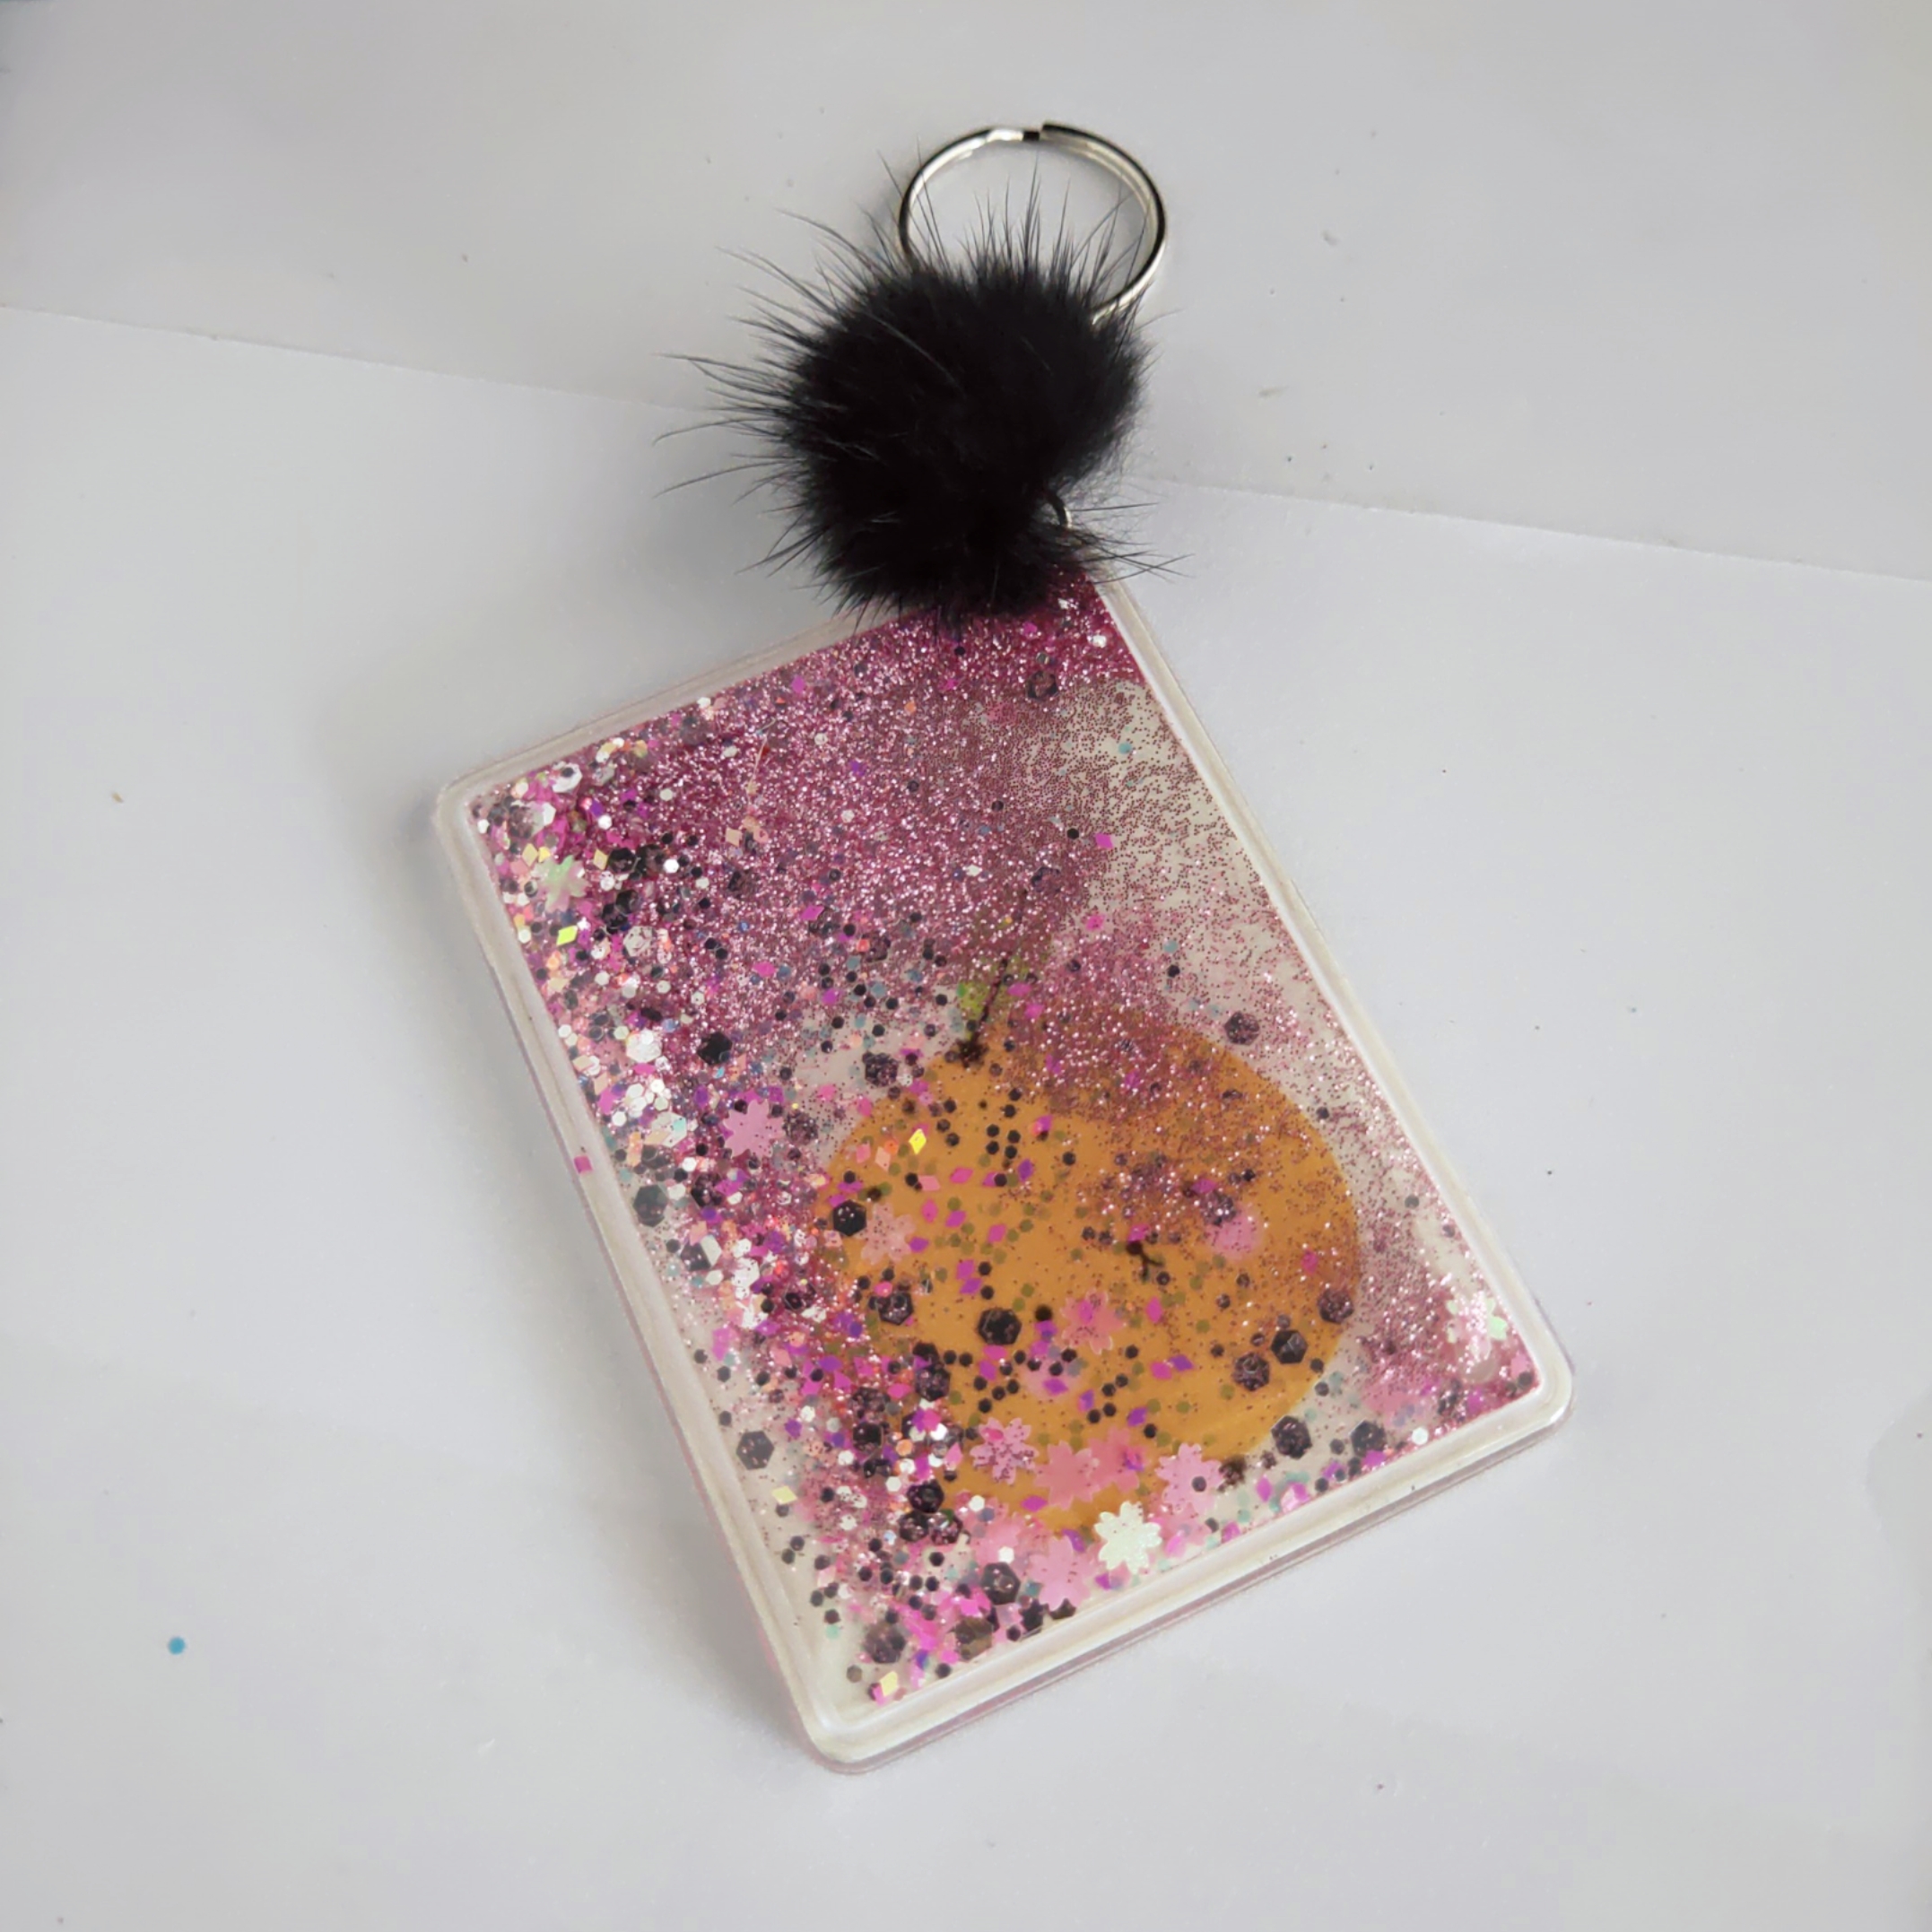 rectangle Floating sparkle glitter makeup single mirror with Pompom keychain with 1X mirror for handbags